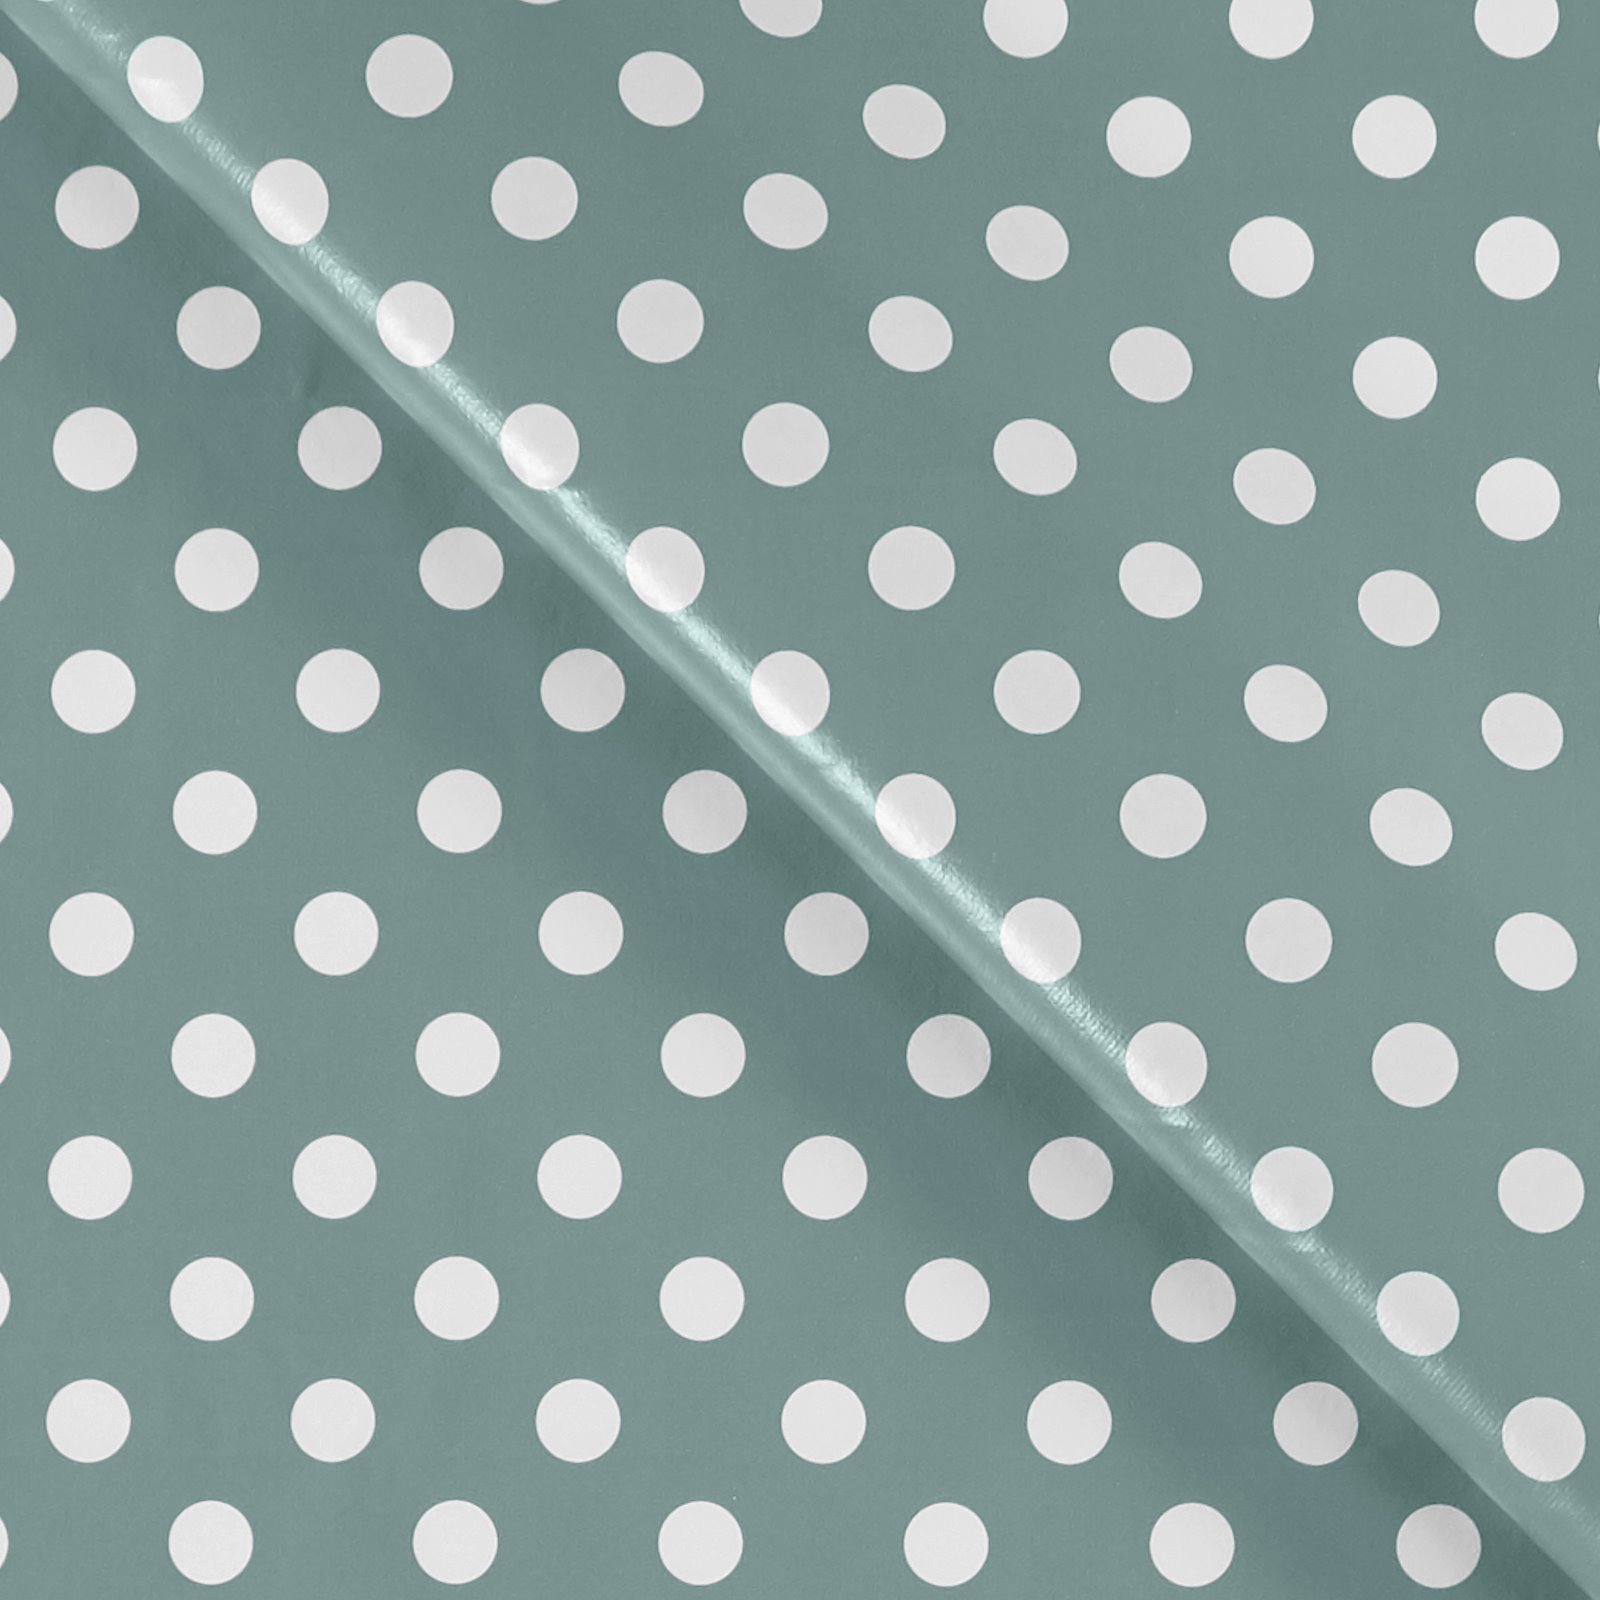 Non-woven oilcloth ds blue w white dots 861570_pack